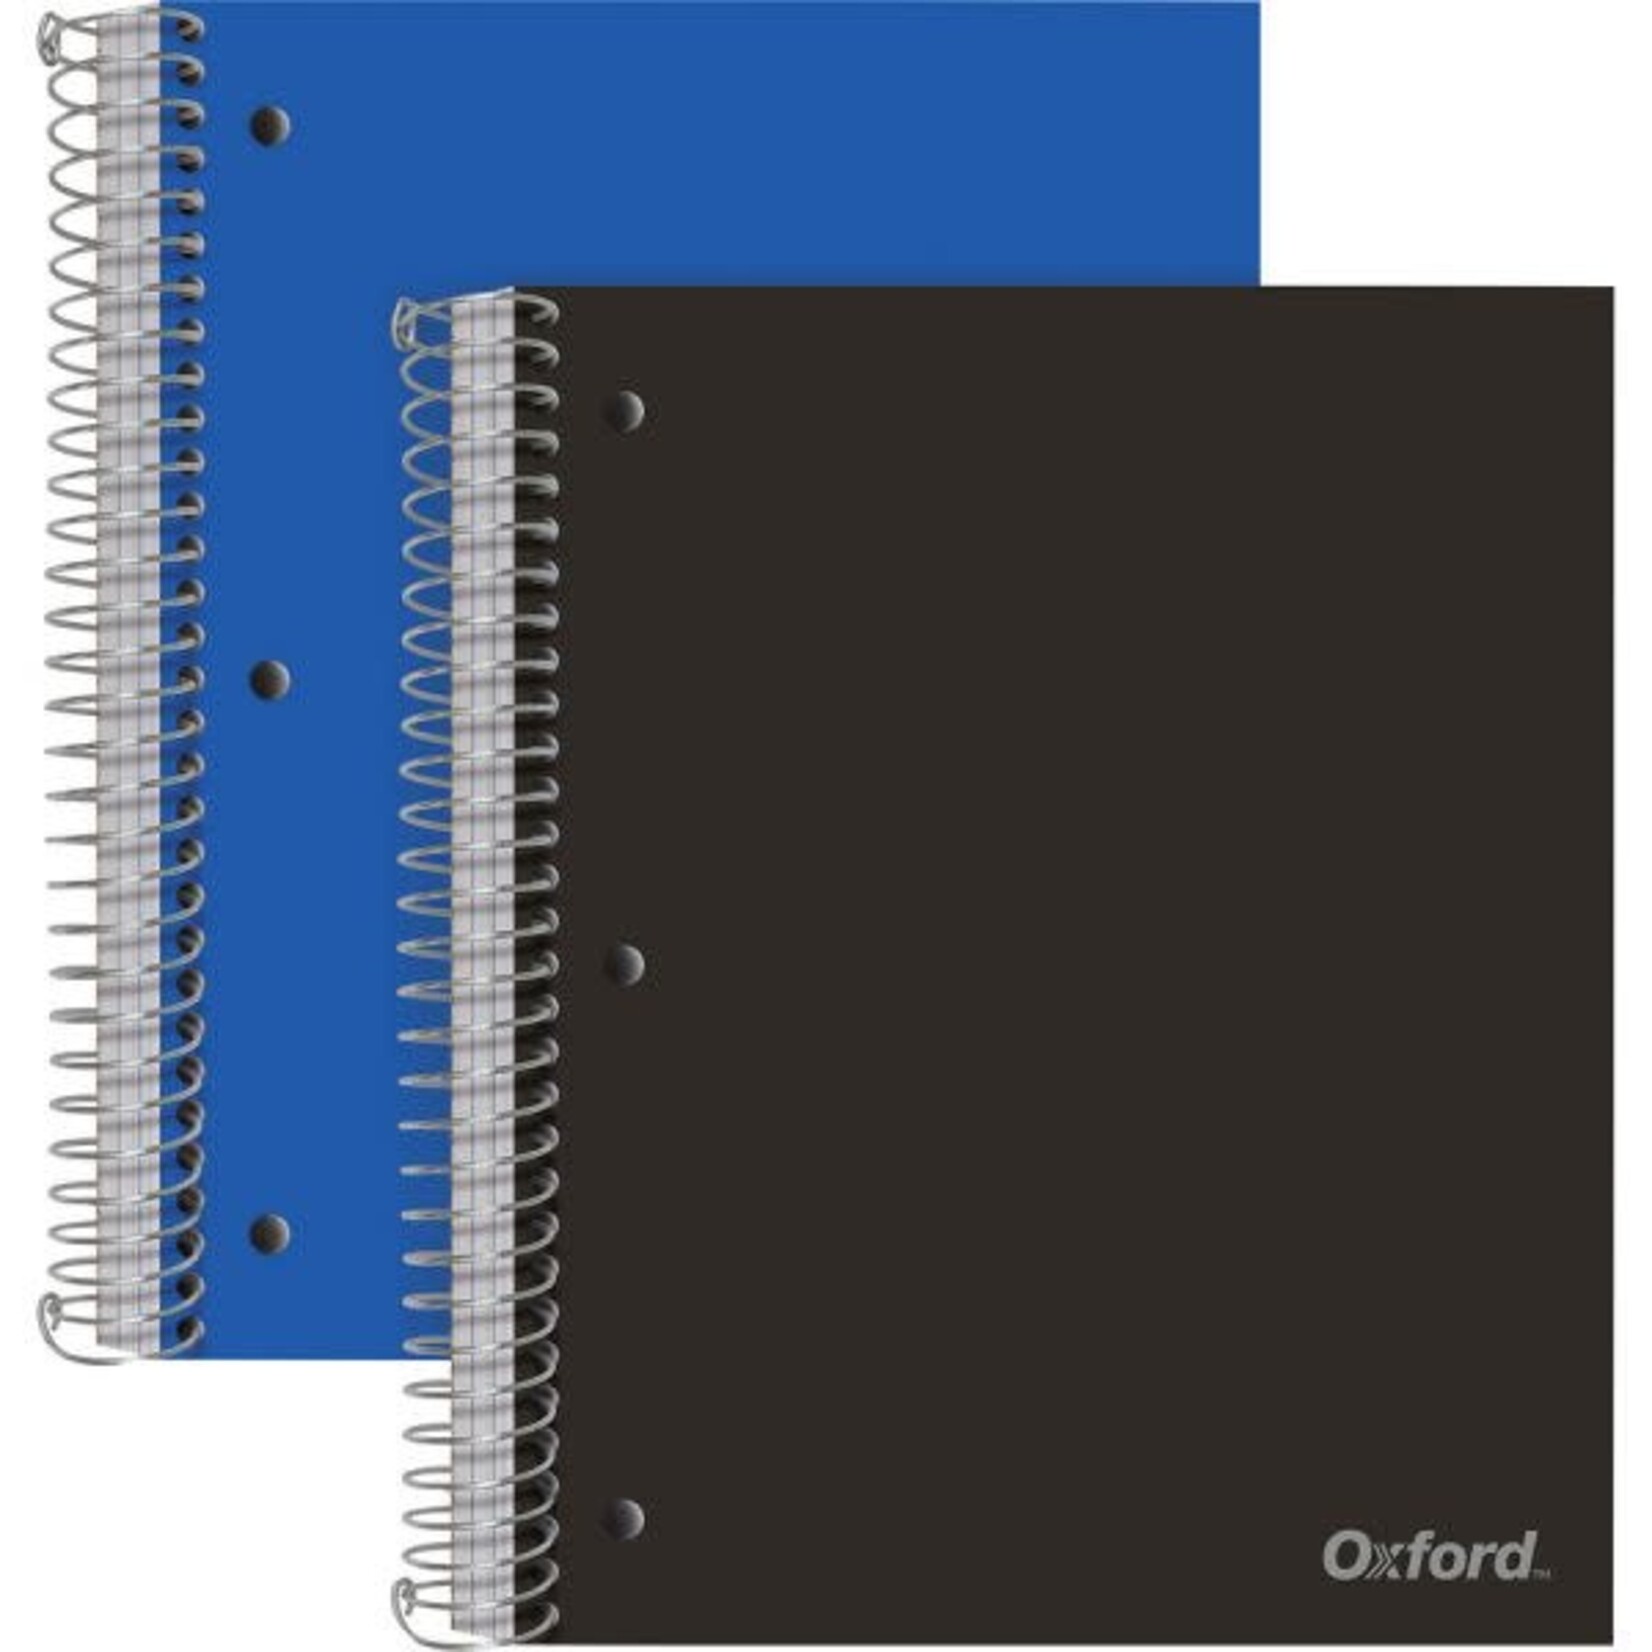 Oxford Oxford 3 Subject Poly Notebook College Ruled 150 Sheets sold individually